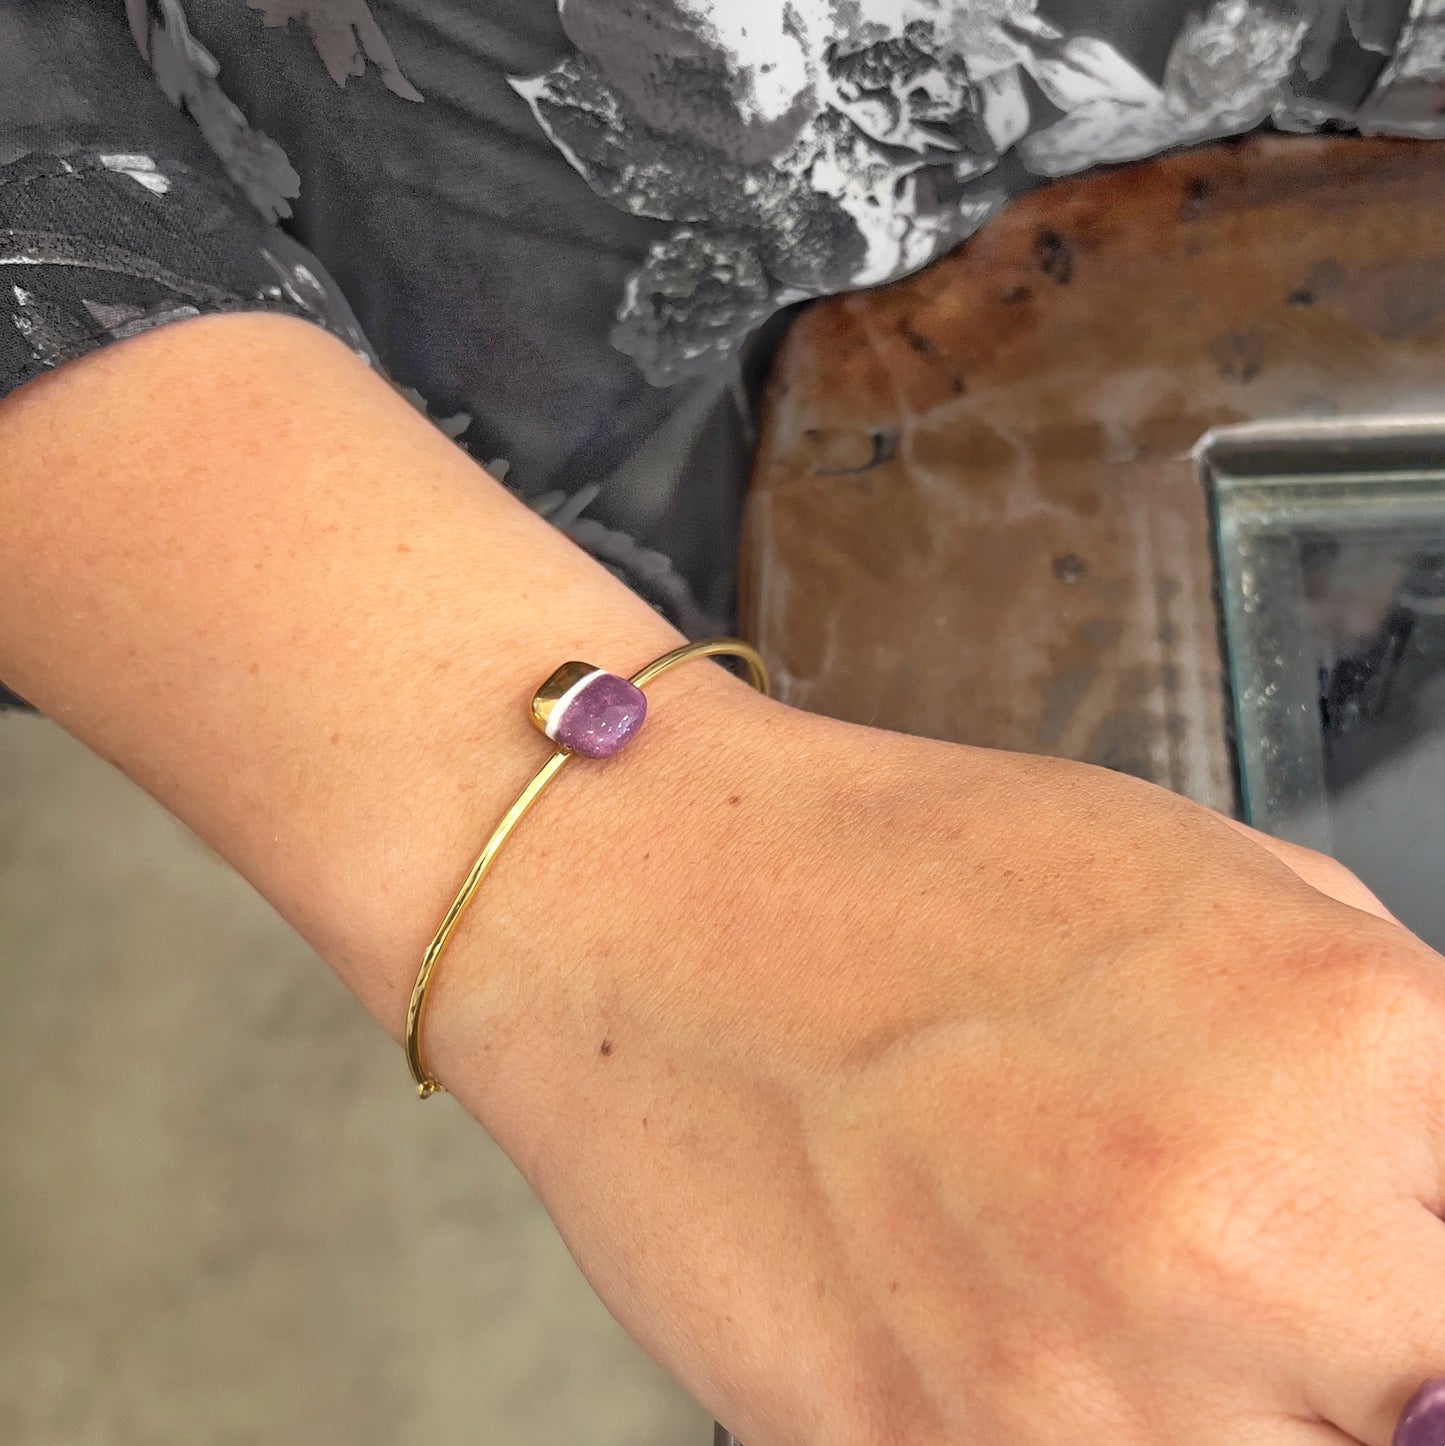 Gold and red fish bracelet